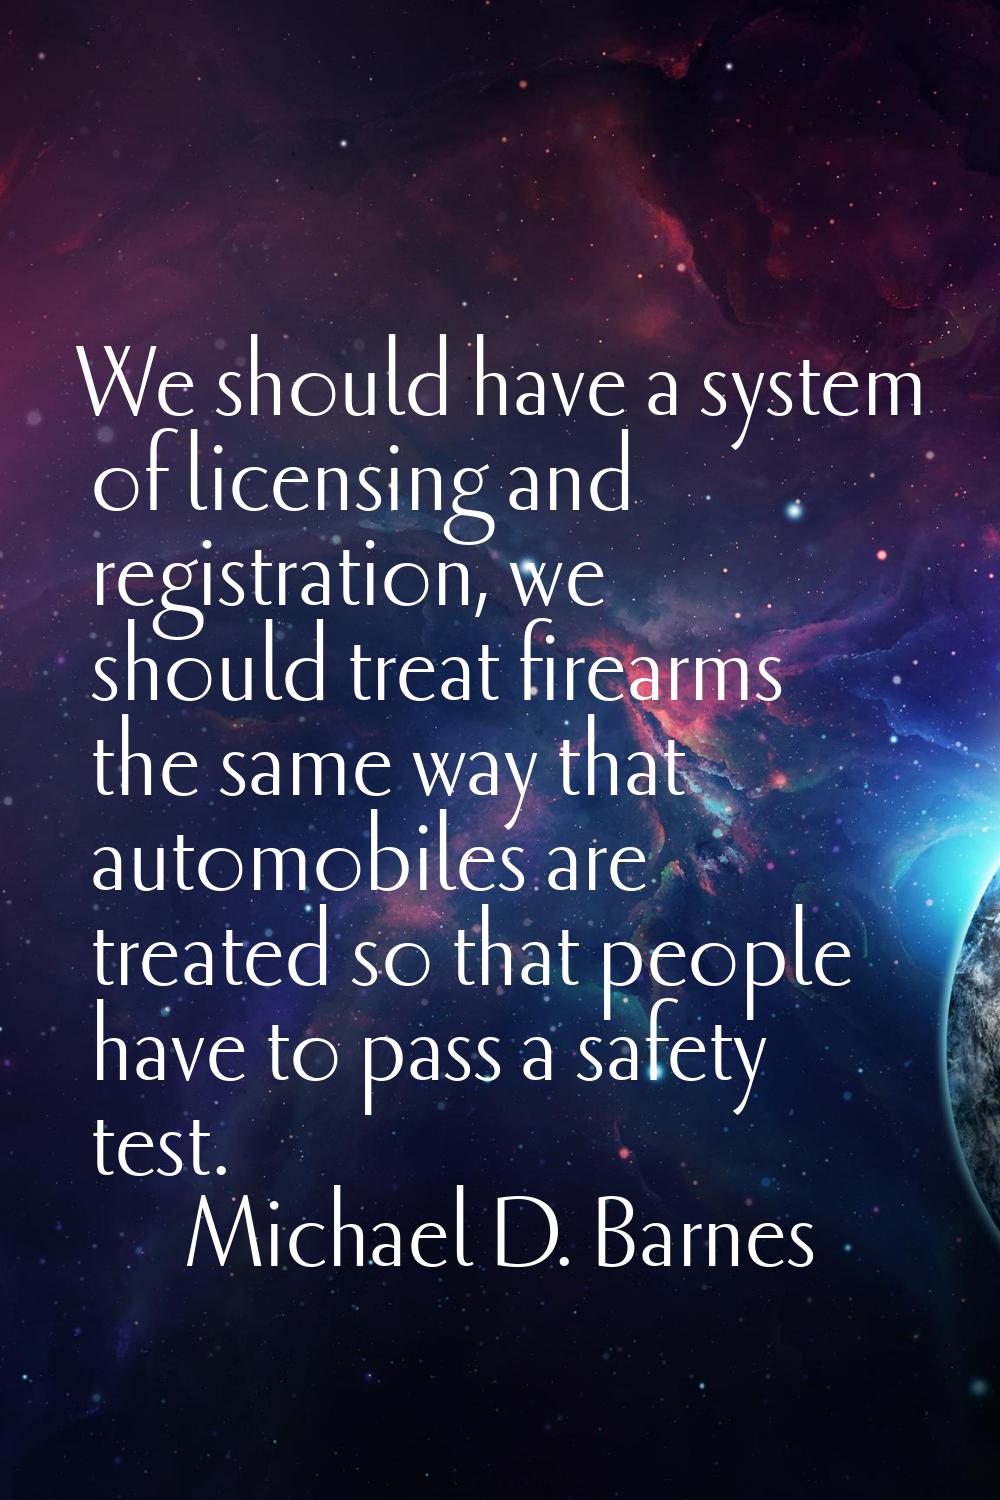 We should have a system of licensing and registration, we should treat firearms the same way that a